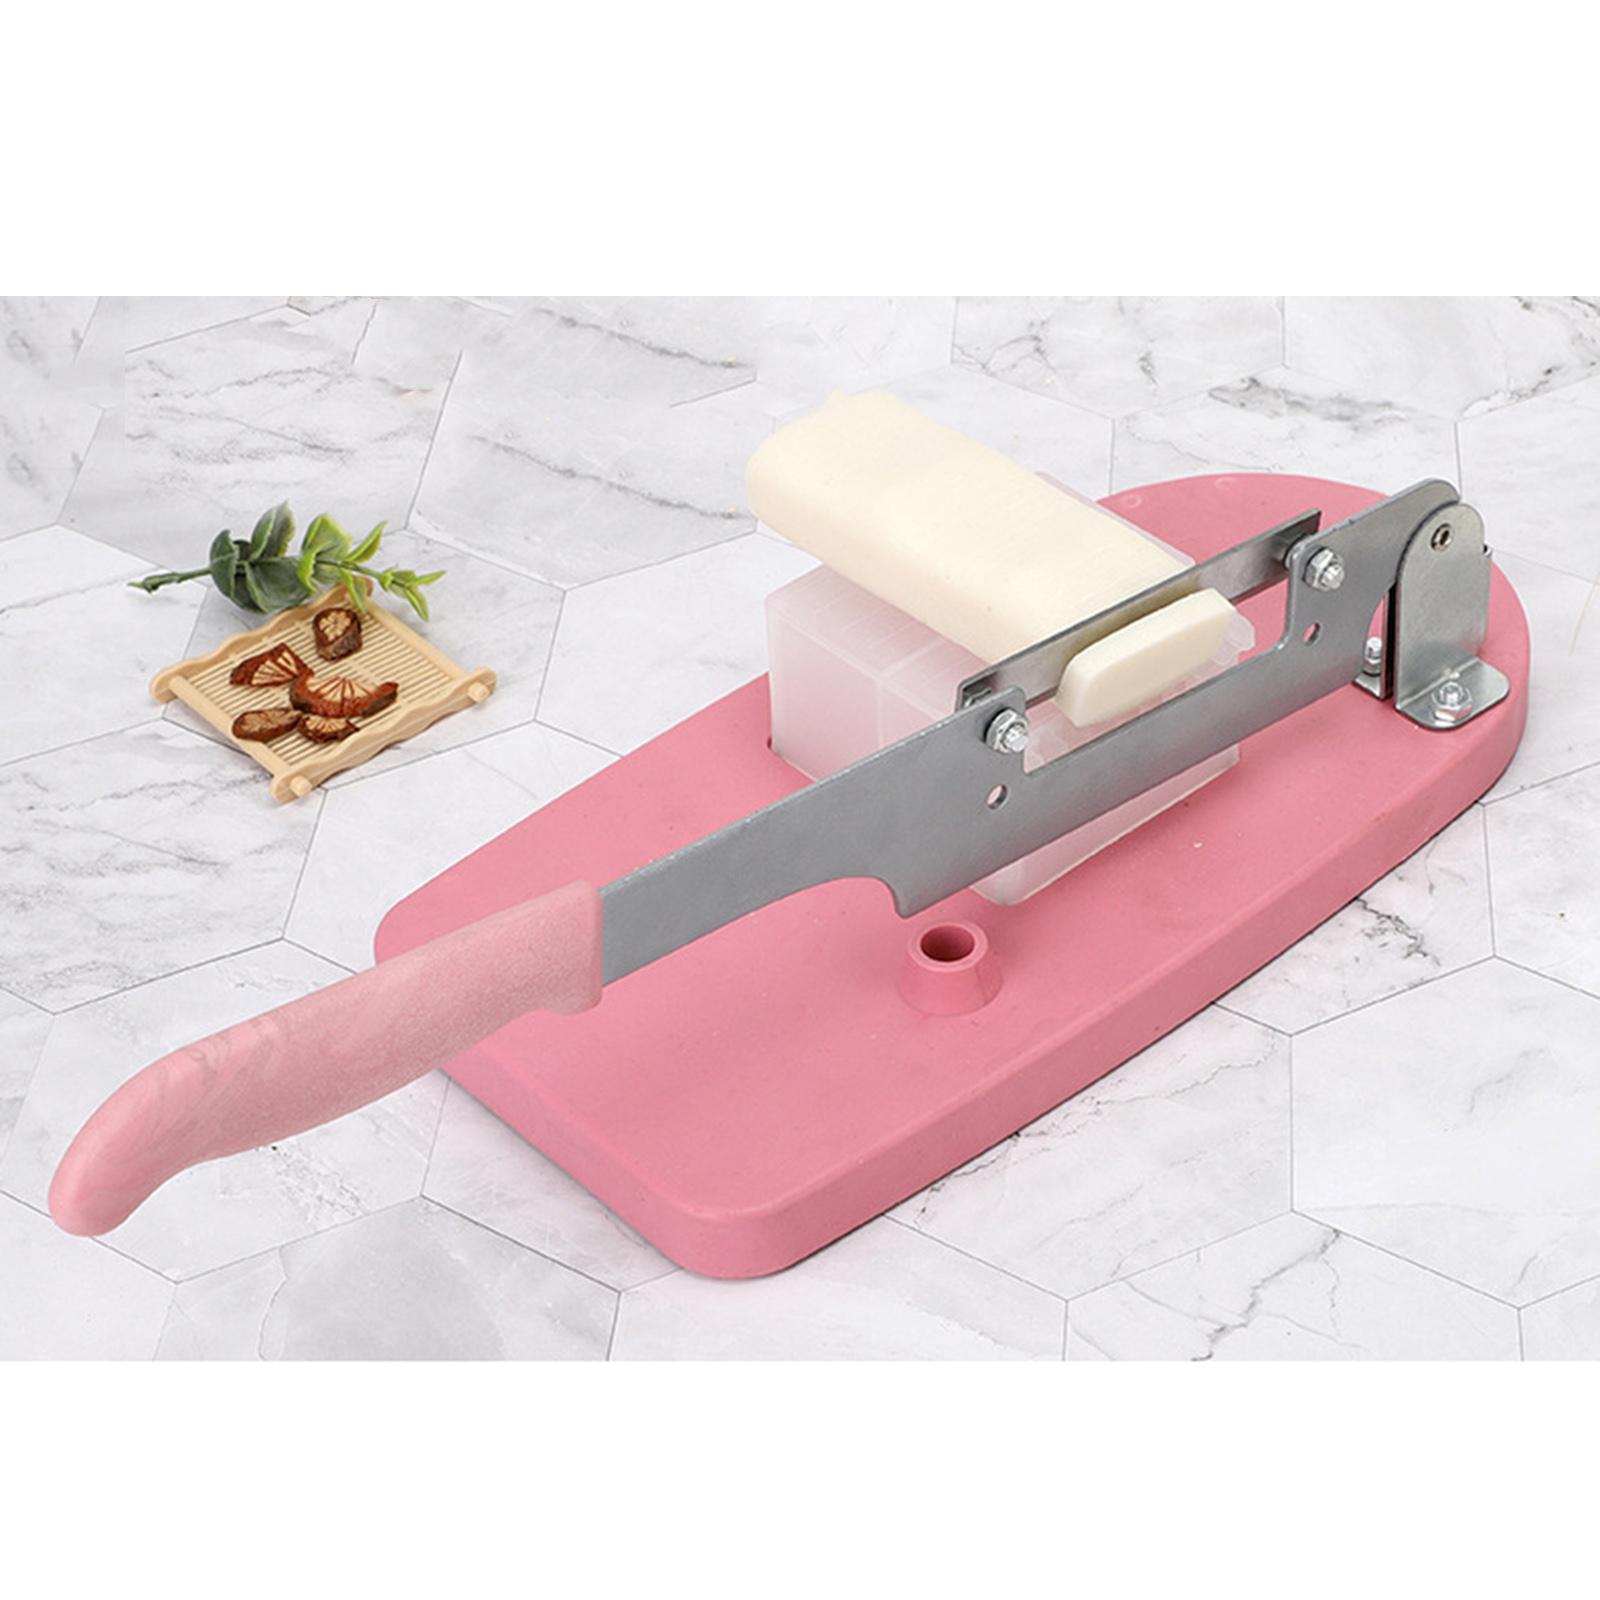 Home Kitchen Multifunctional Table Slicer Food Cutter Manual Cutting Machine for Rice Cakes